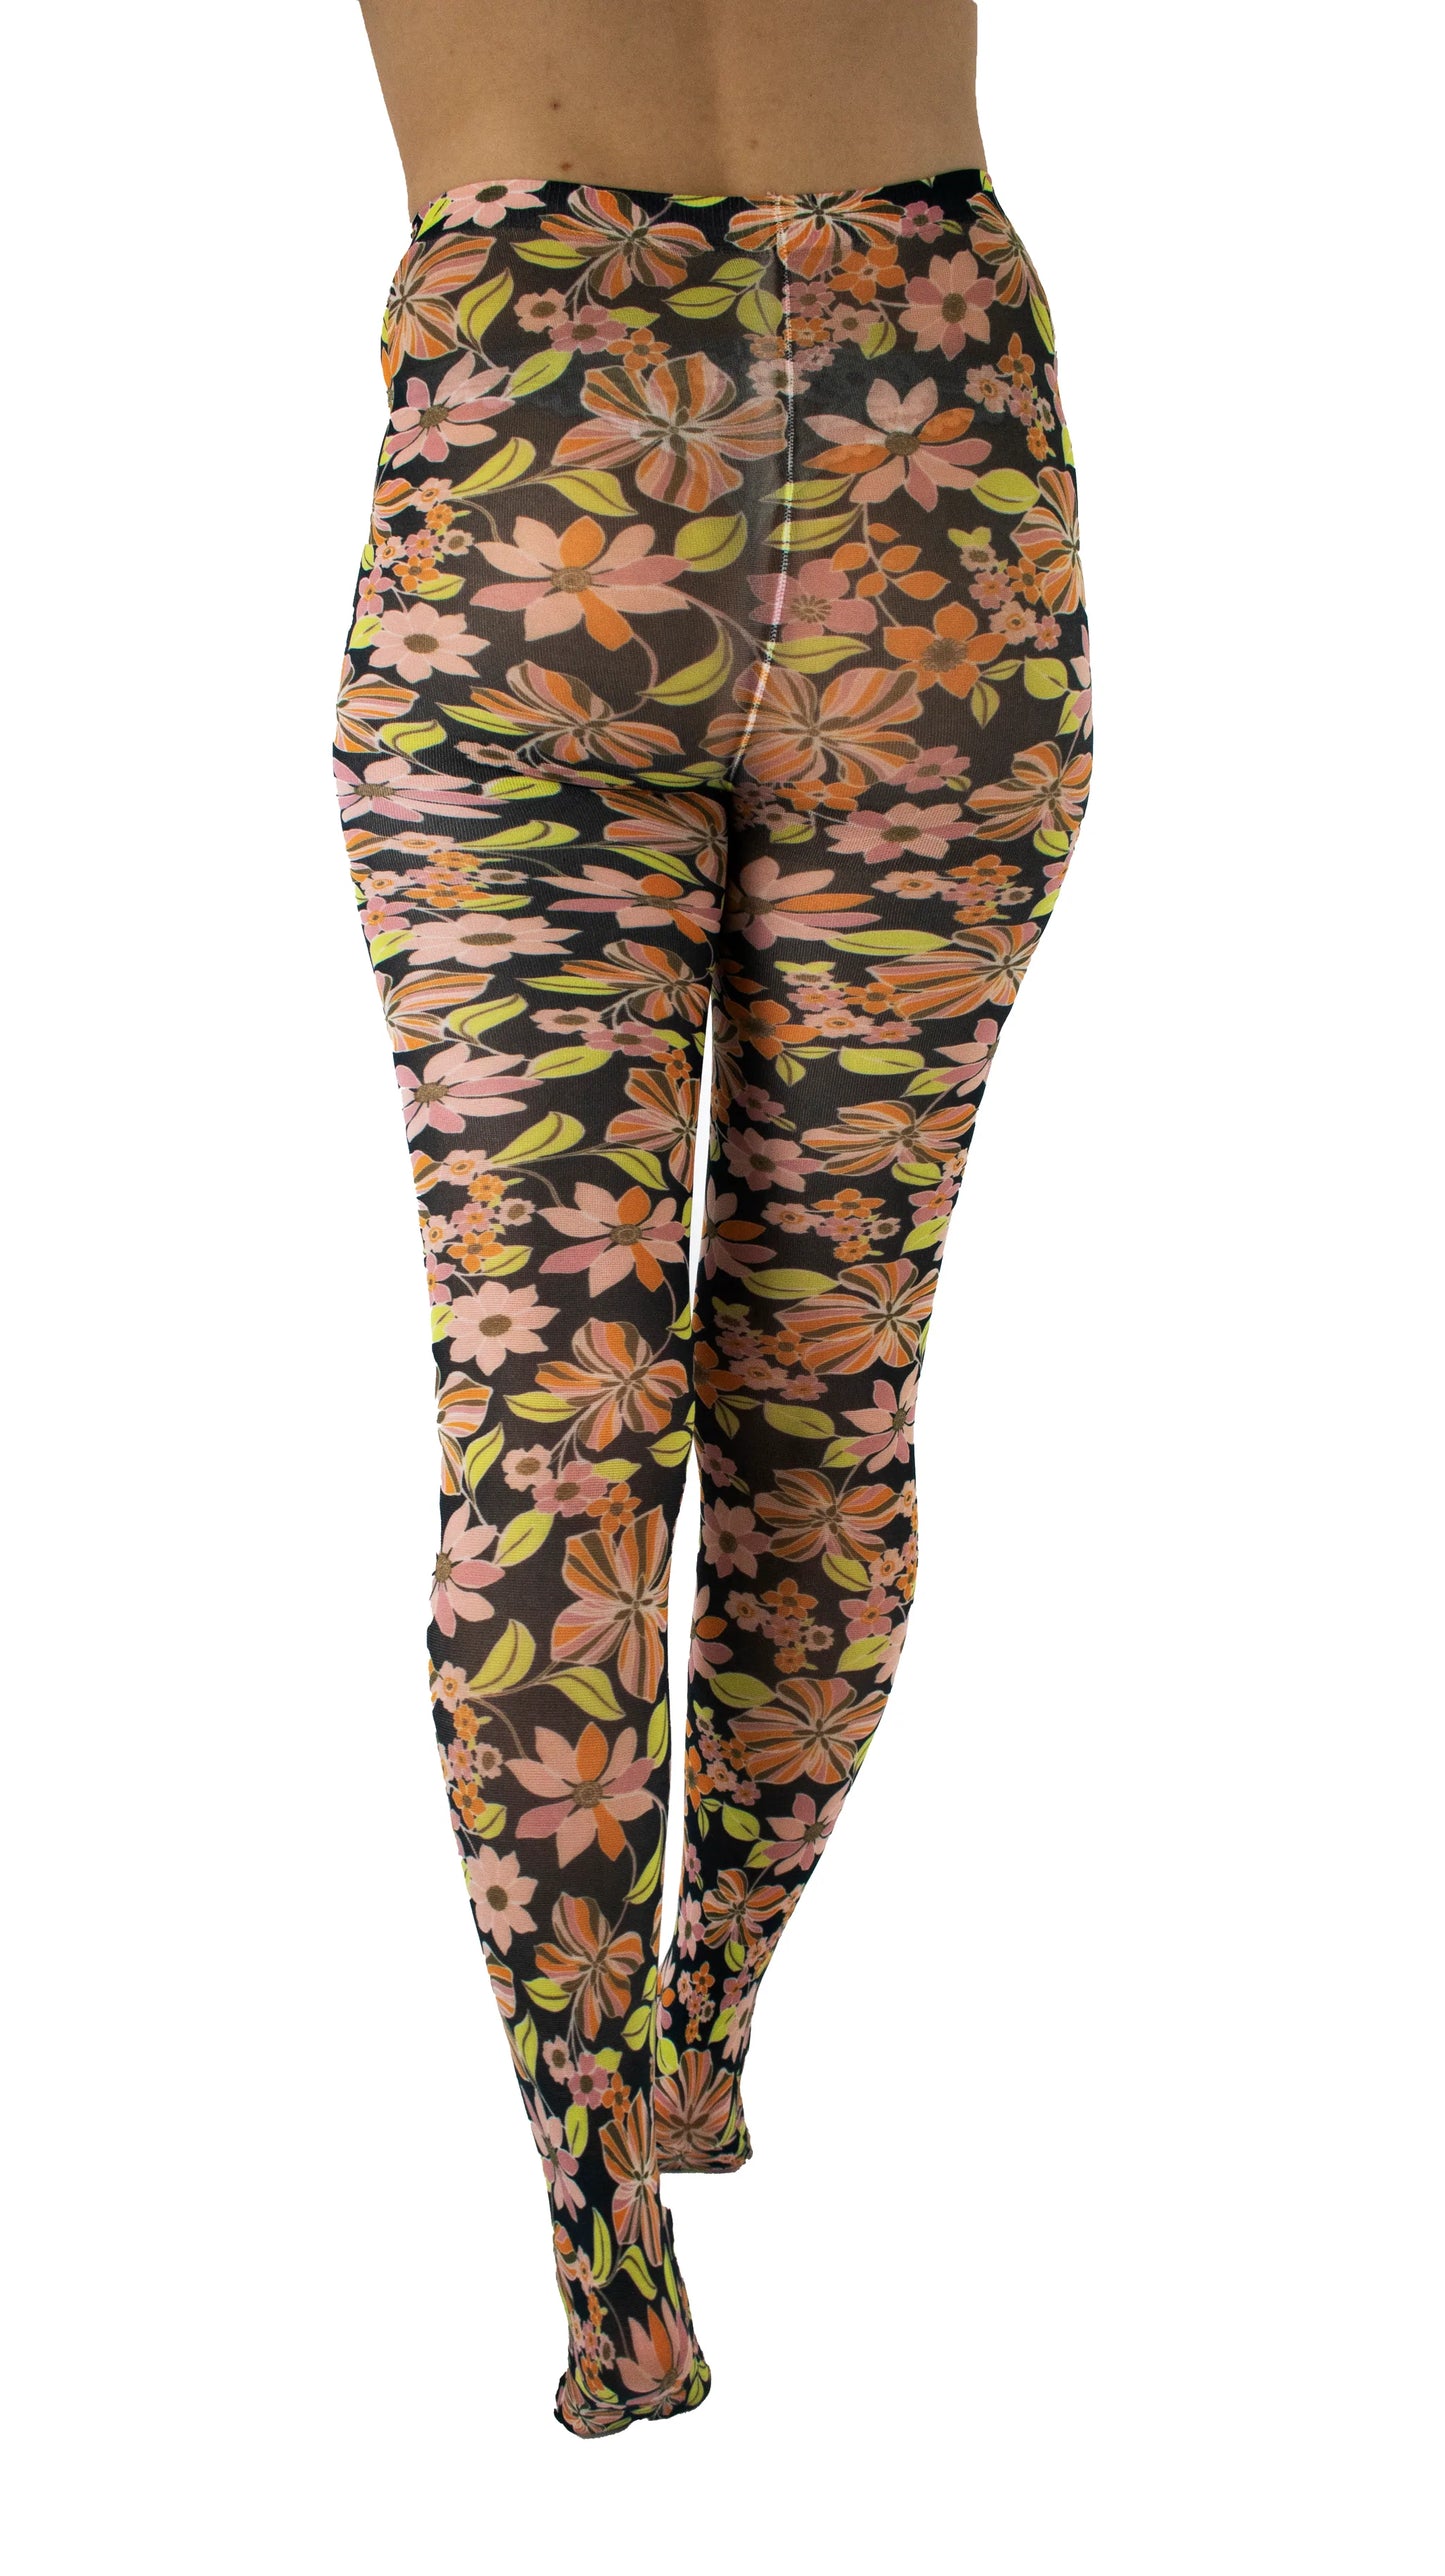 Colour Pop Floral Printed Tights - sizes 4-20